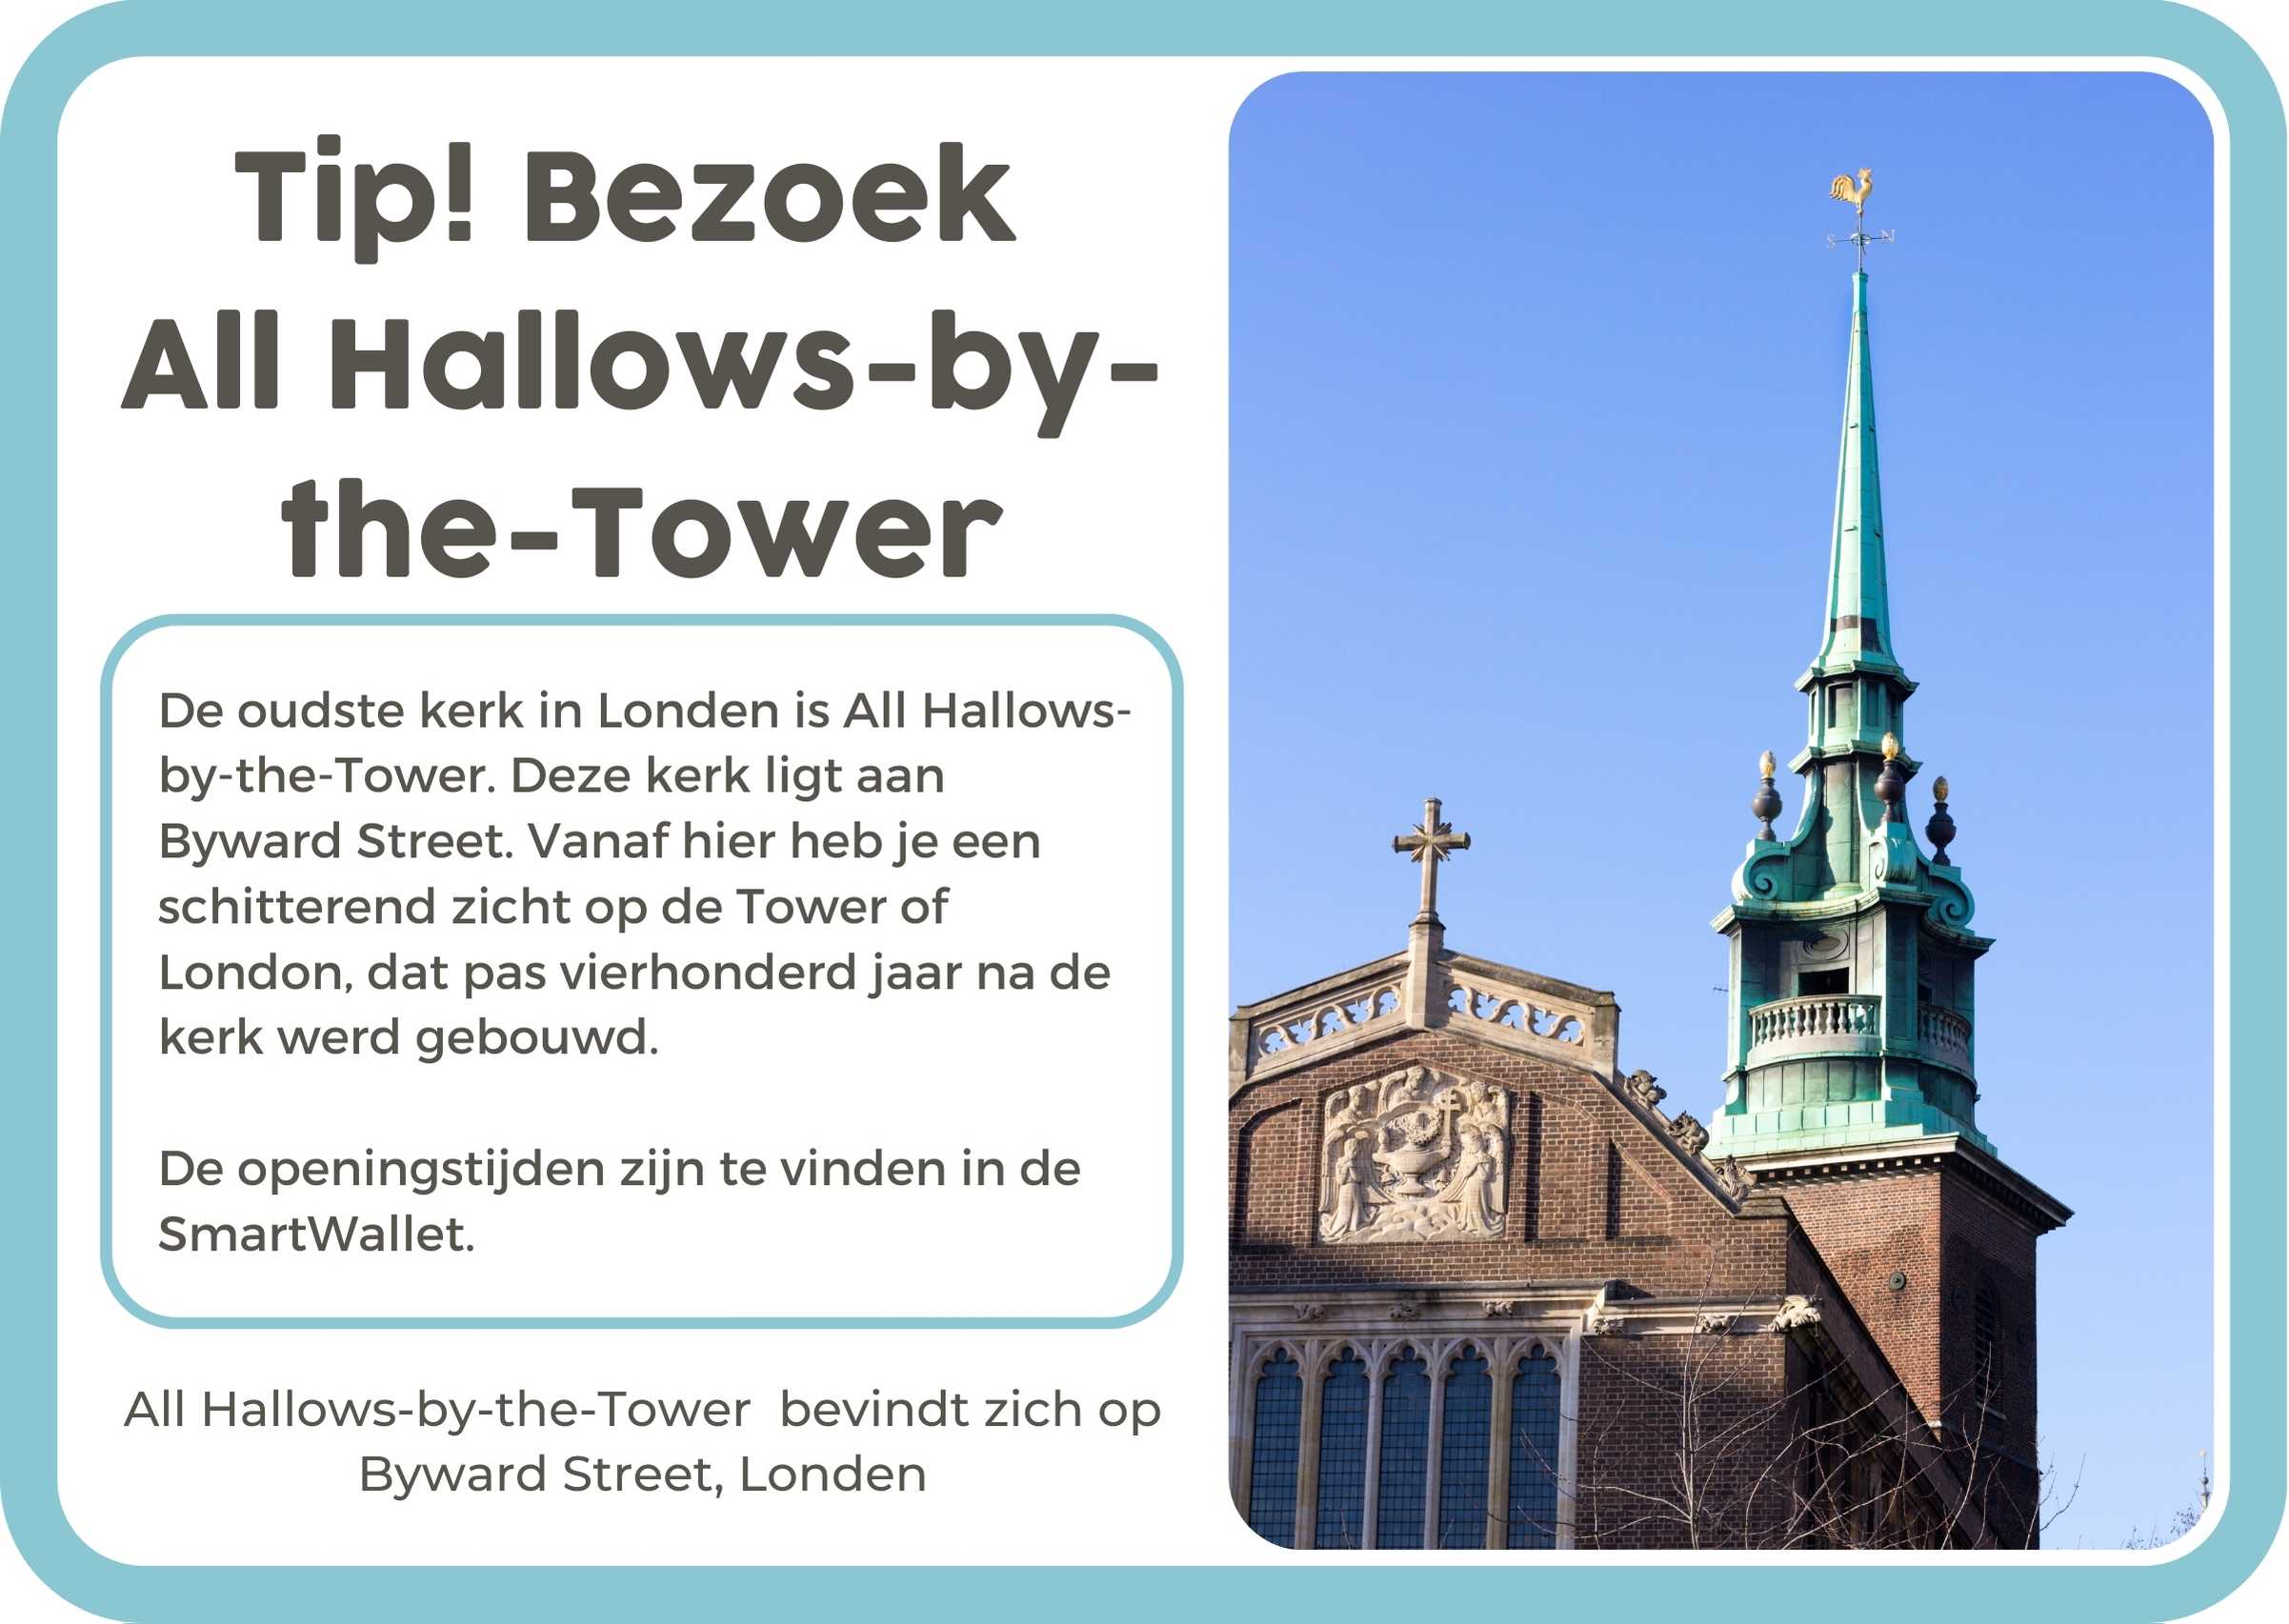 NL All Hallows-by-the-Tower